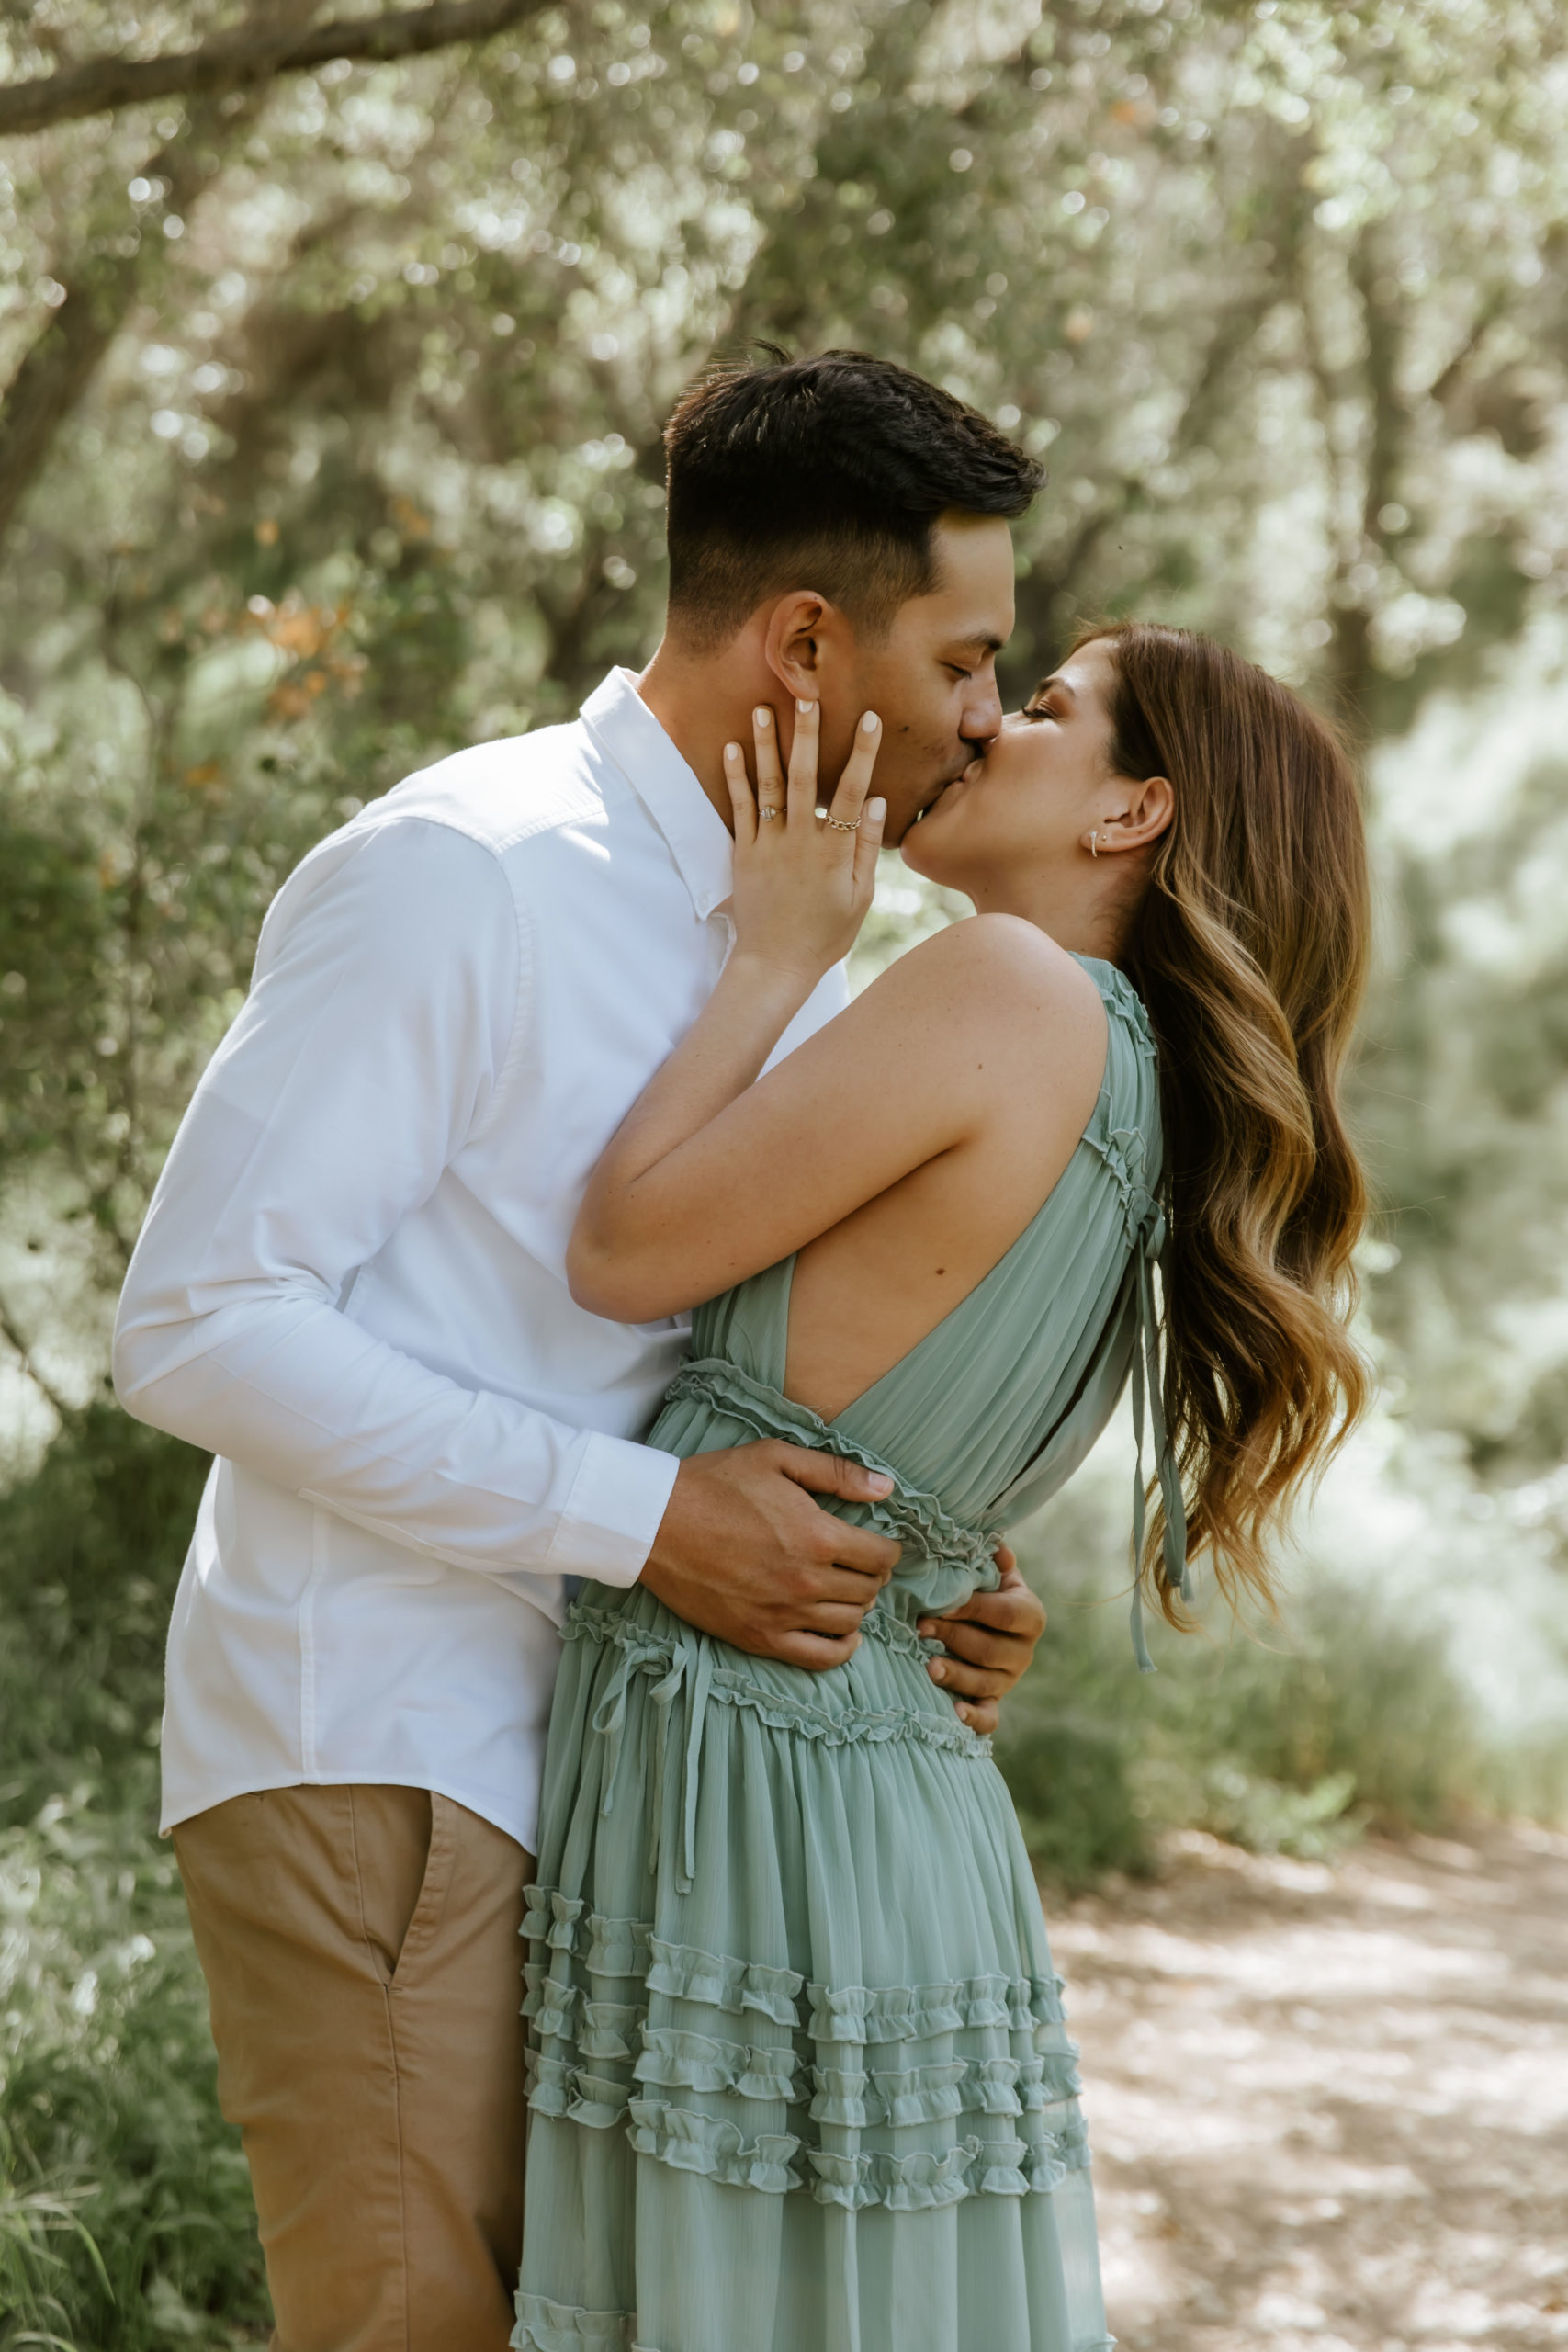 engaged couple kissing in the forest during their engagement photoshoot